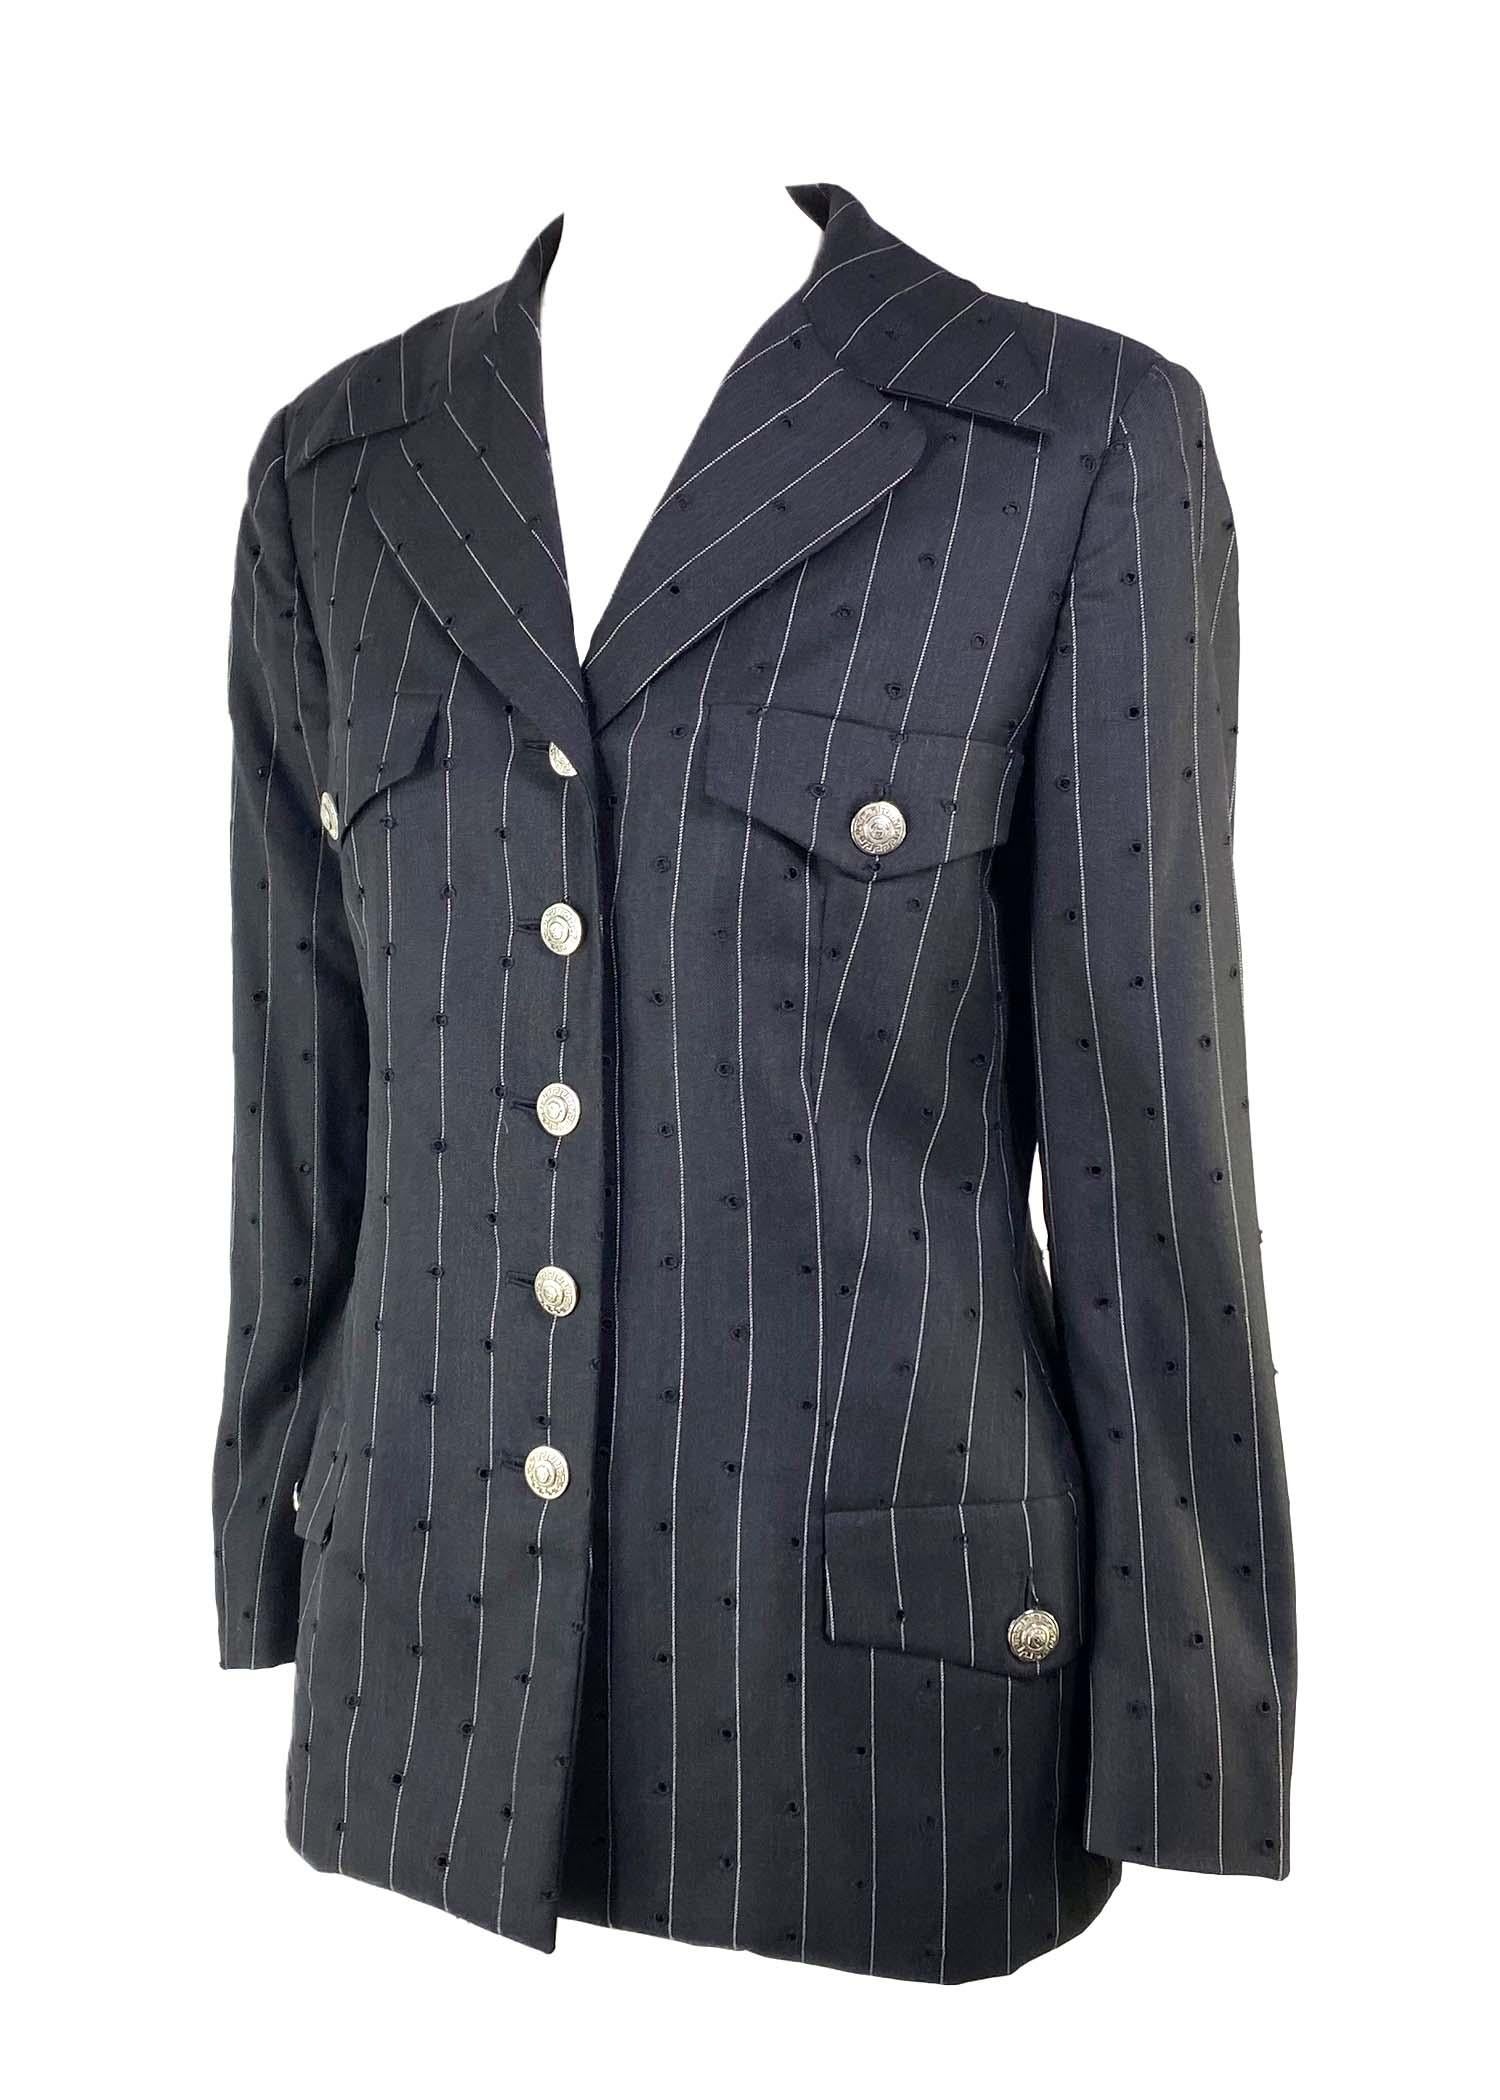 Presenting a pinstripe perforated Gianni Versace Couture blazer, designed by Gianni Versace. From the Spring/Summer 1994 collection, this piece features clean cut designs in perforated fabric. This collection is remembered for its punk influences